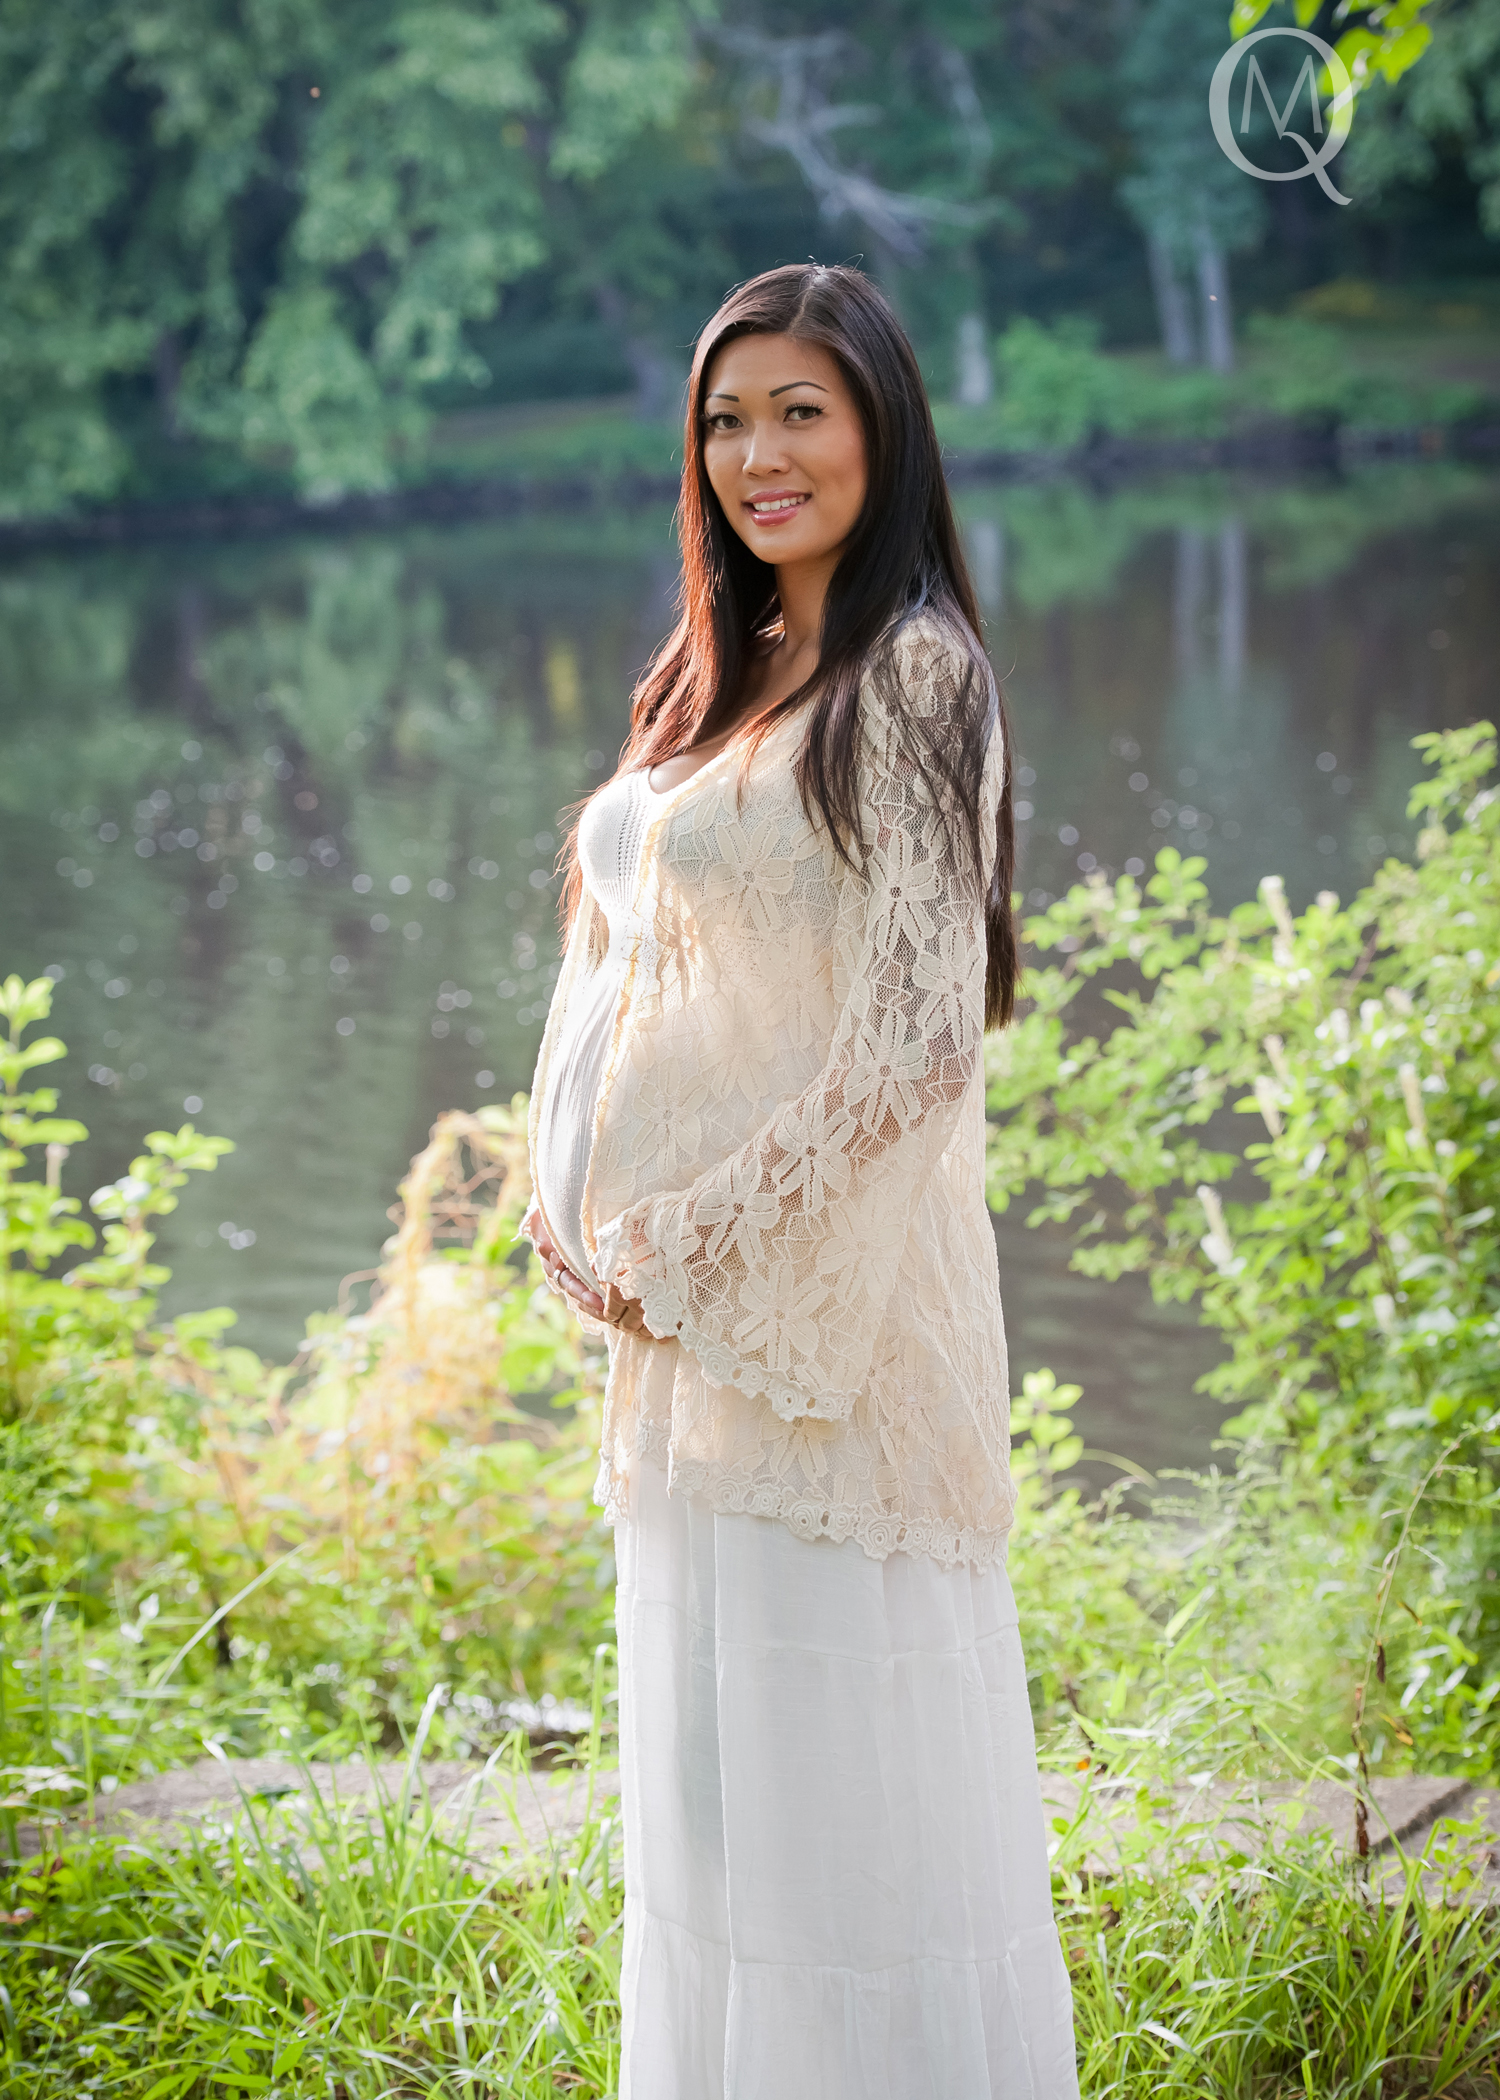 Maternity Photographer in Moorestown New Jersey